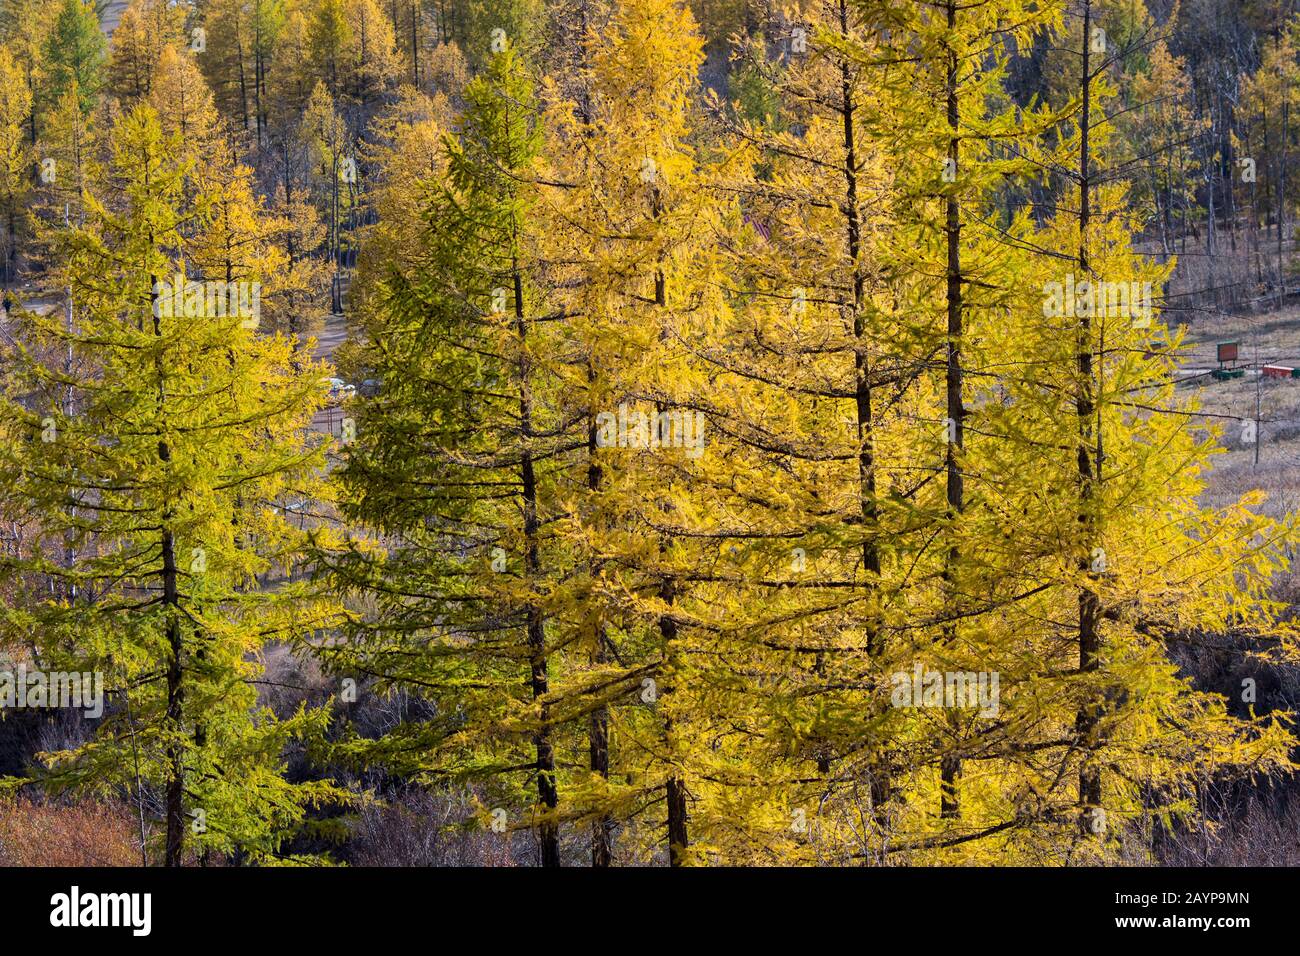 Dahurian larch (Larix gmelinii) trees in the fall in Gorkhi Terelj National Park which is 60 km from Ulaanbaatar, Mongolia. Stock Photo